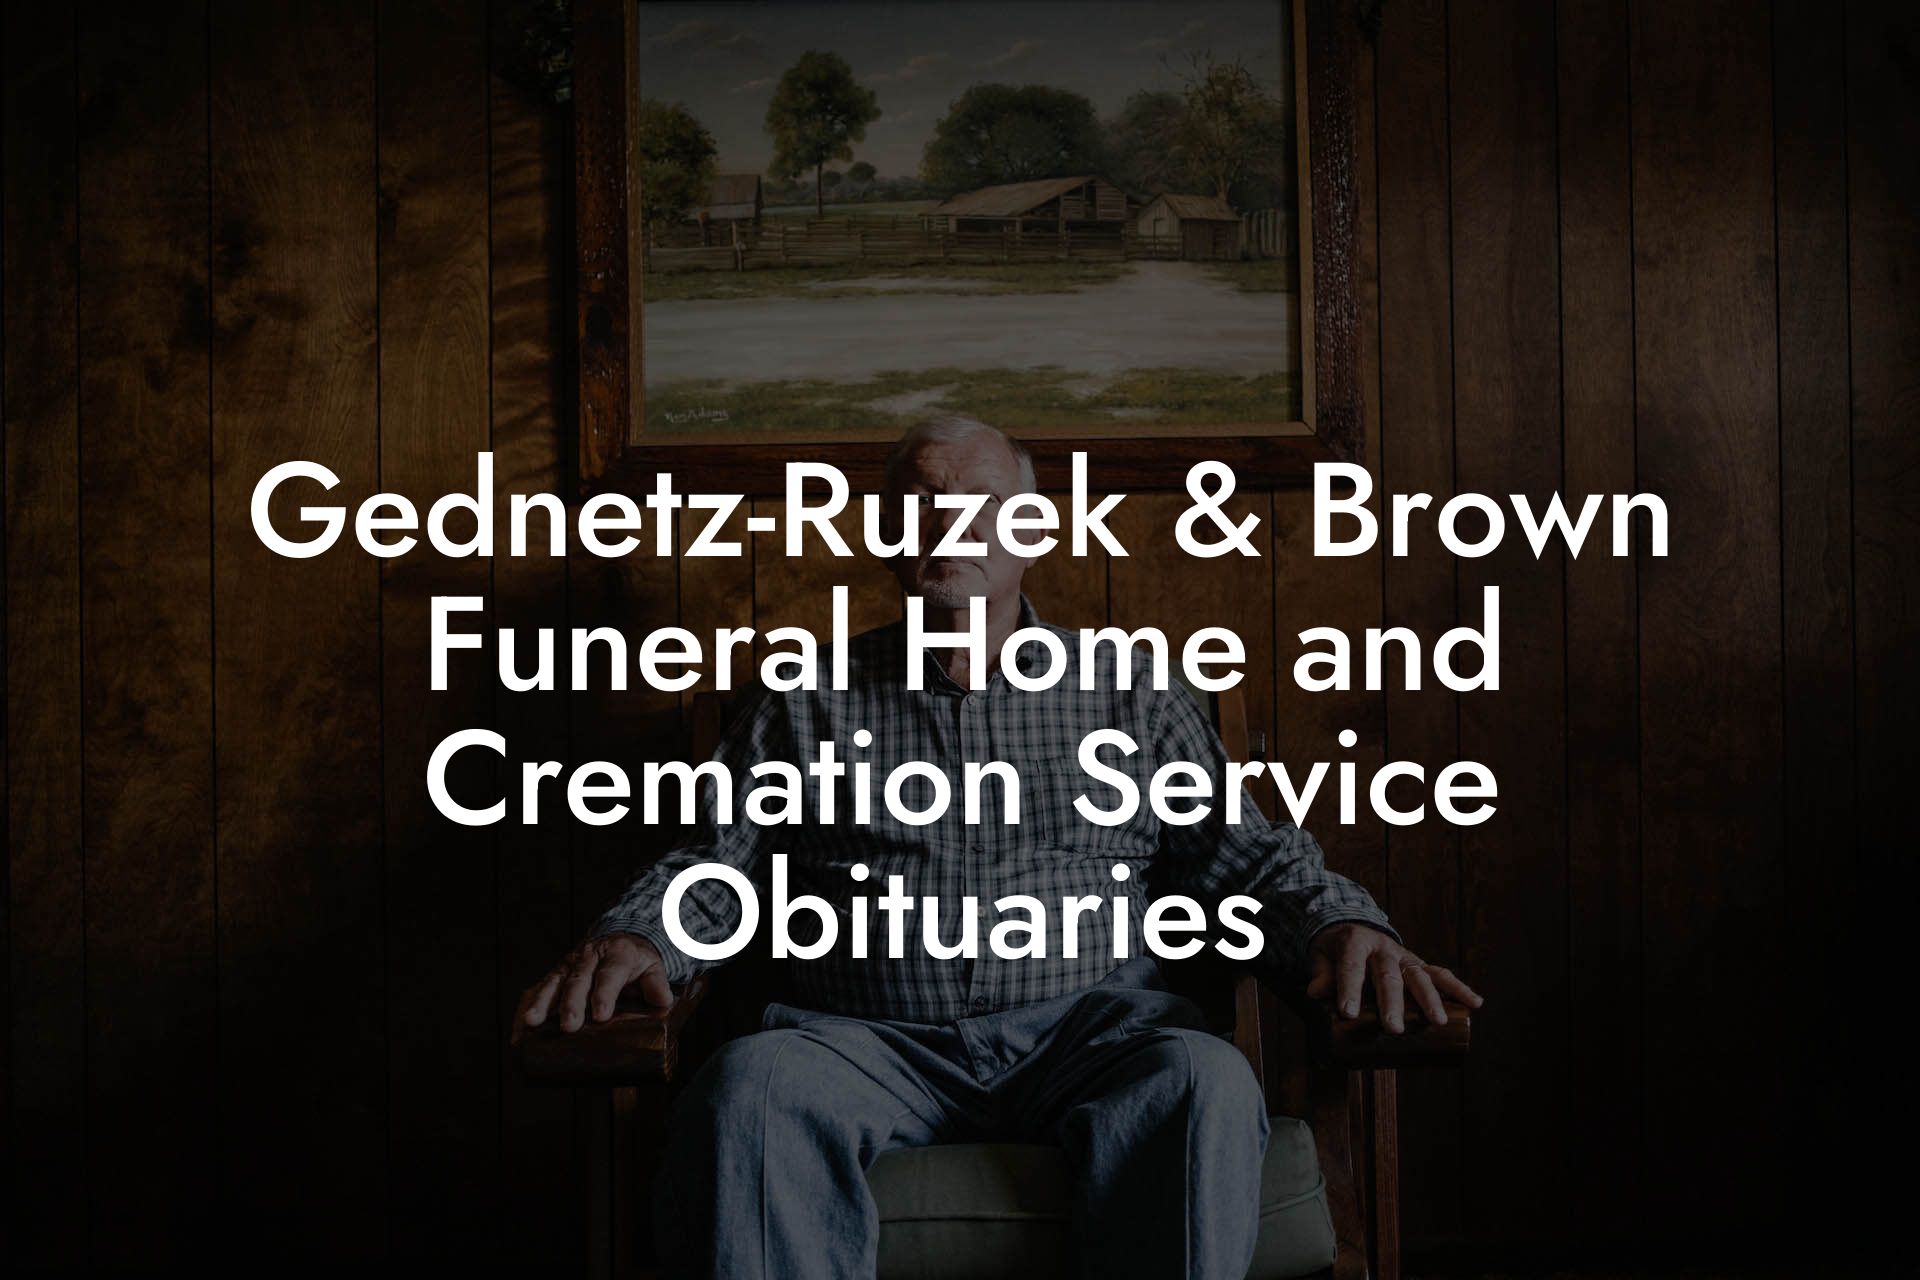 Gednetz-Ruzek & Brown Funeral Home and Cremation Service Obituaries